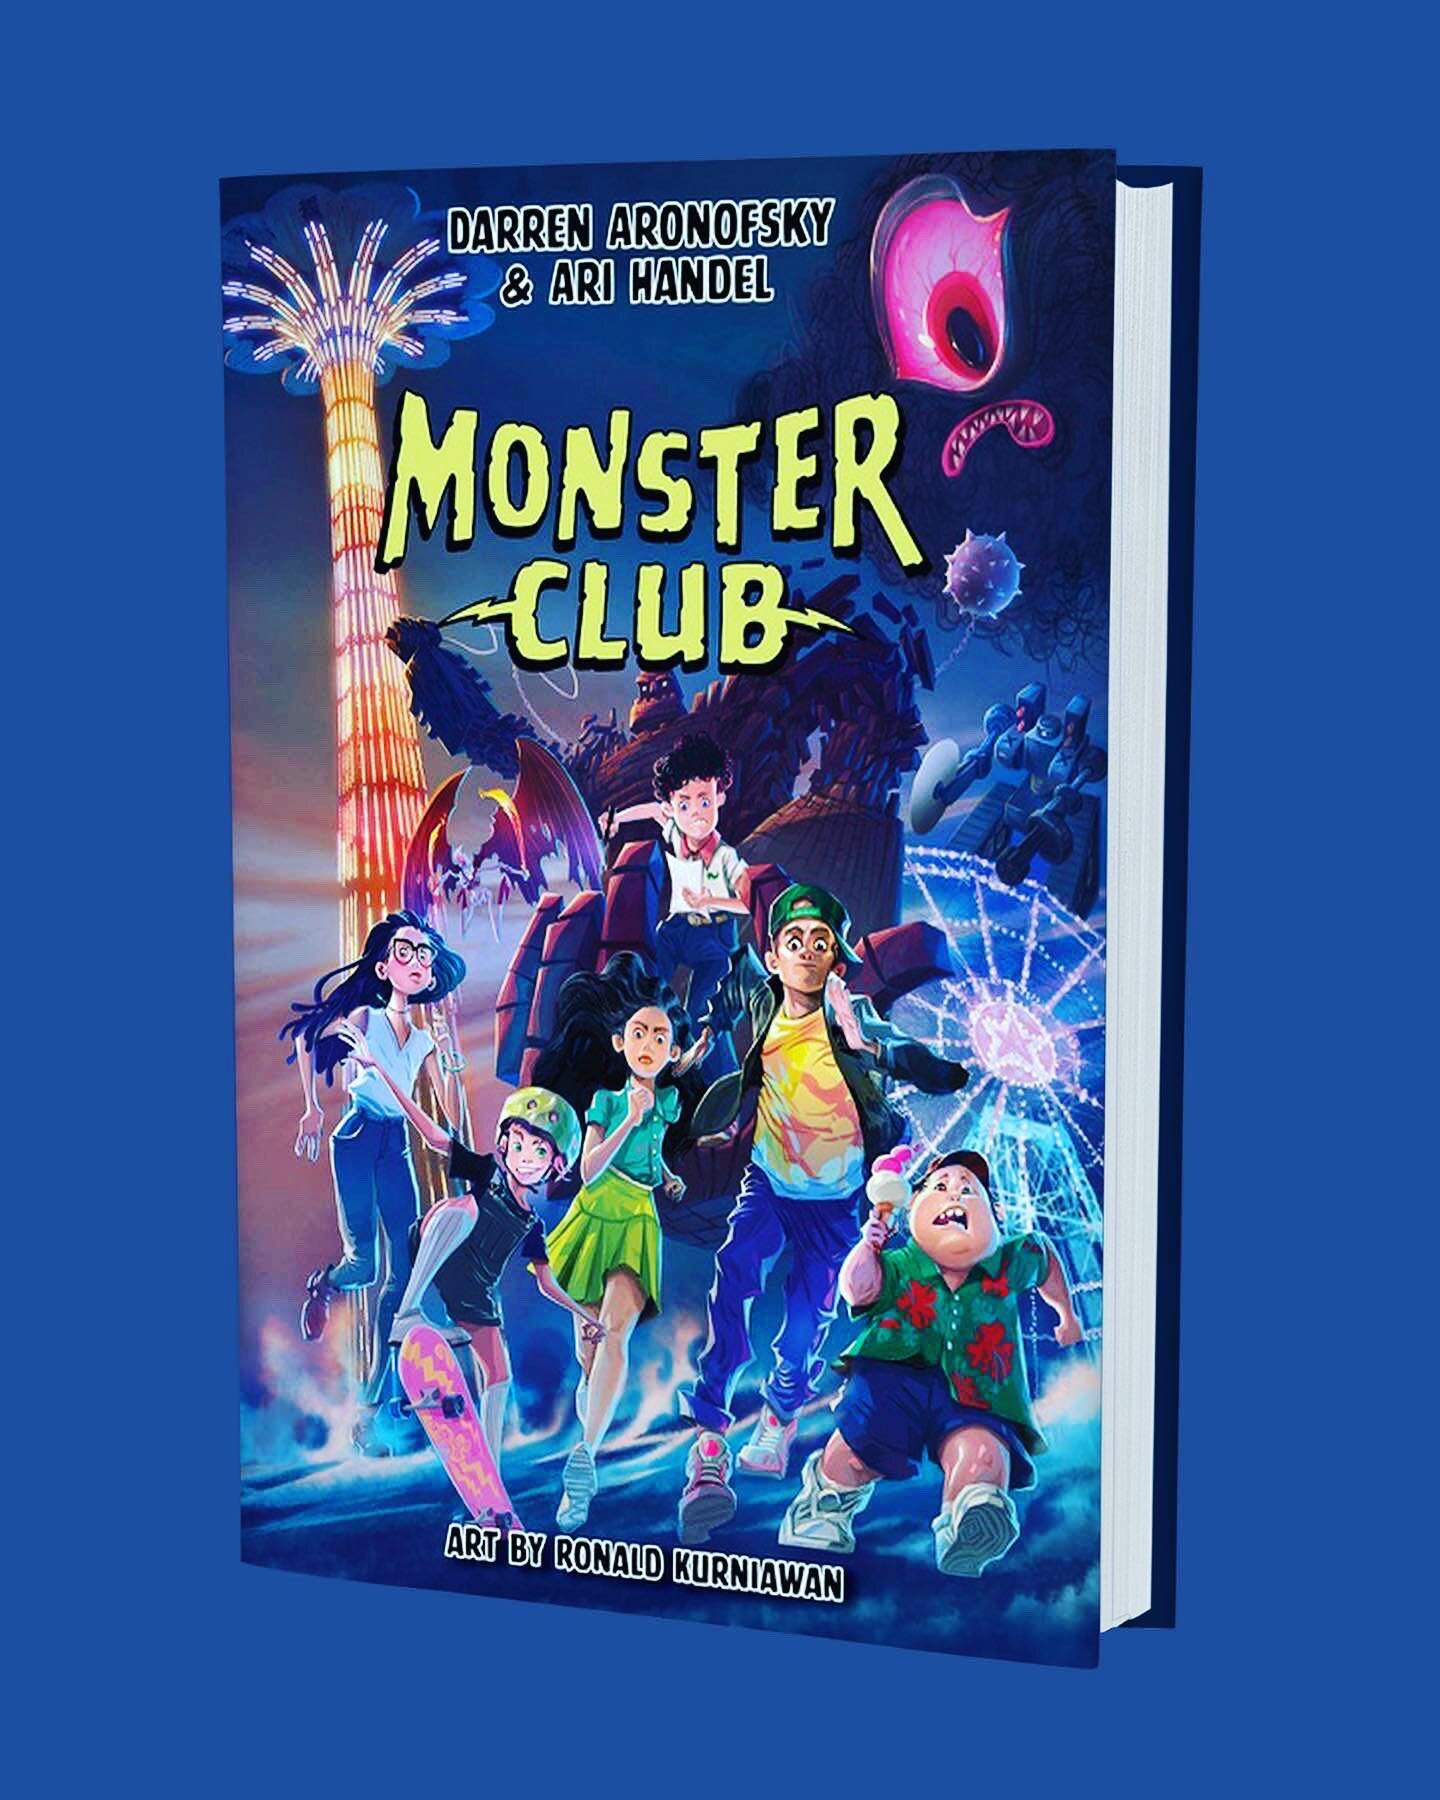 This delightful book is out today! For all the young readers who love drawing and monsters and magic and action and laughs, this one is for YOU. I had the immense pleasure and honor of helping the brilliant duo of @darrenaronofsky and Ari Handel as t